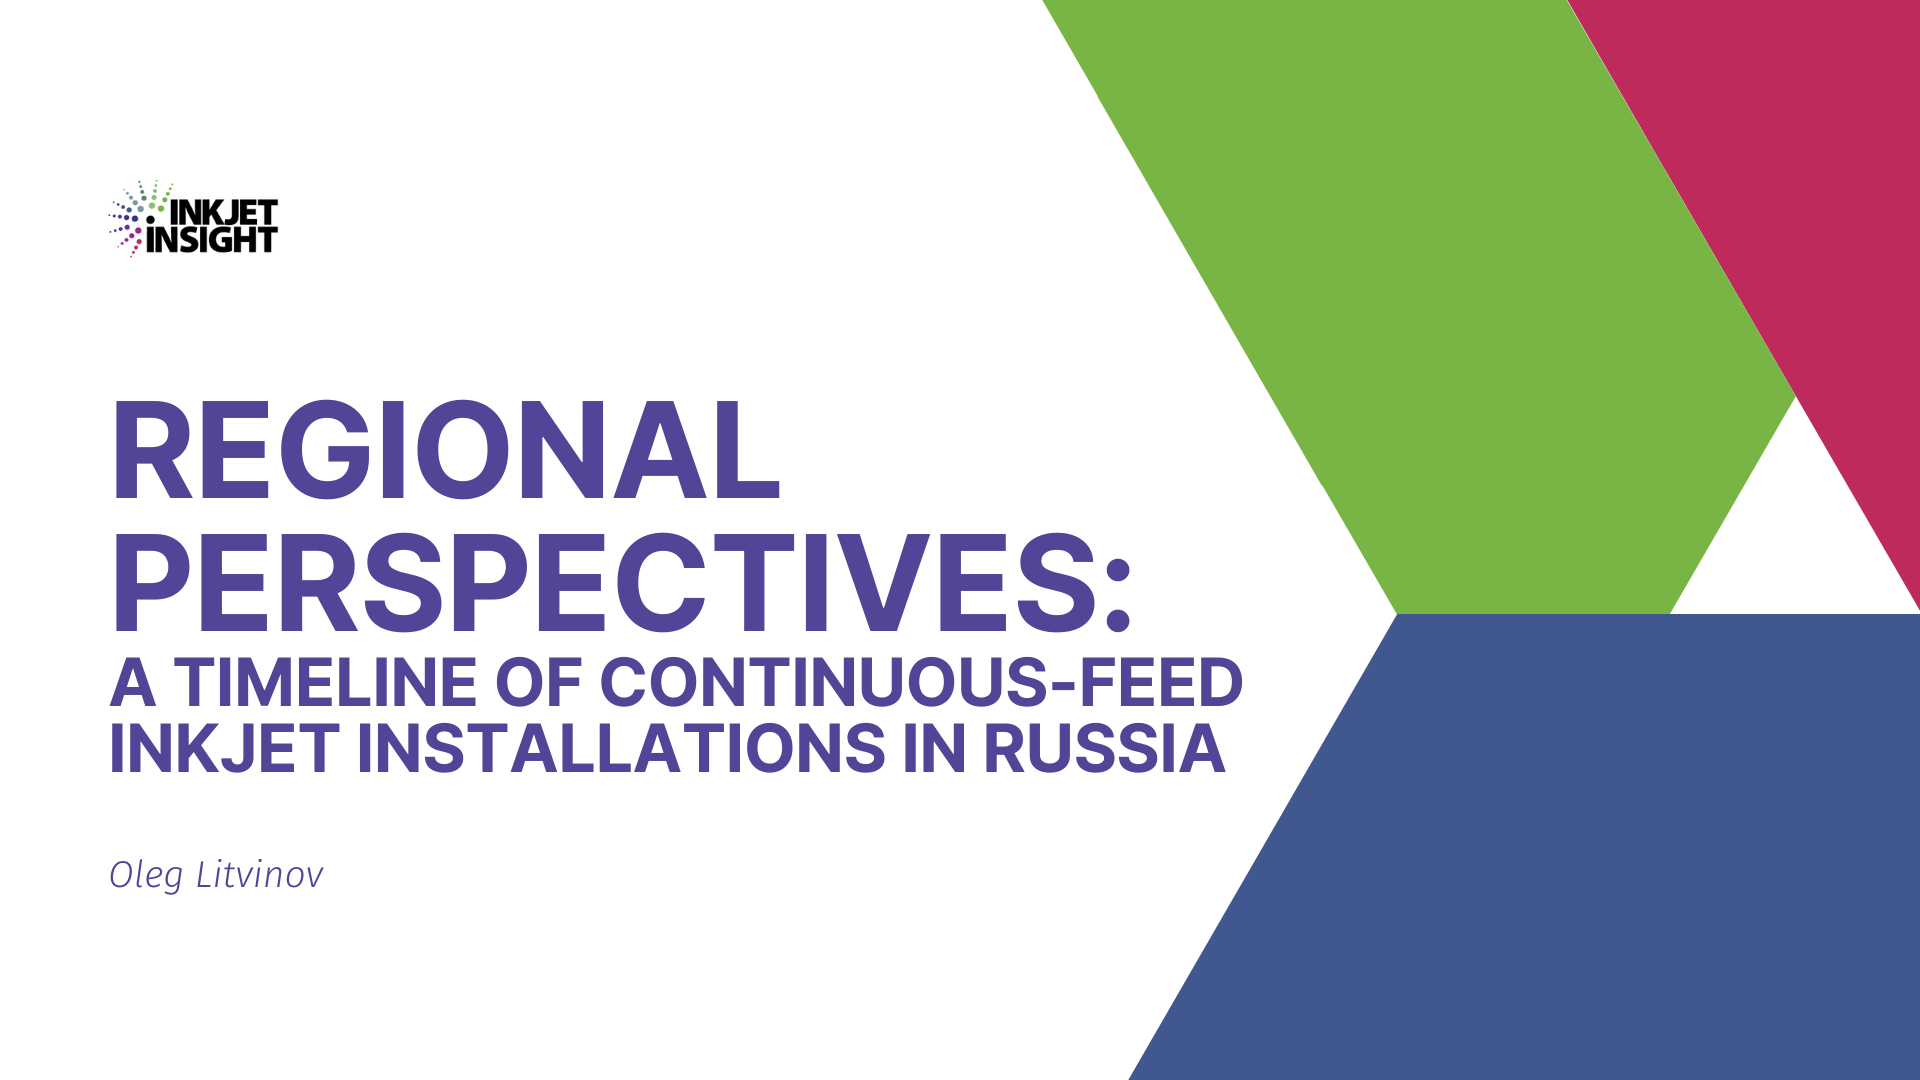 Featured image for “Regional Perspectives: A Timeline of Continuous-Feed Inkjet Installations in Russia”